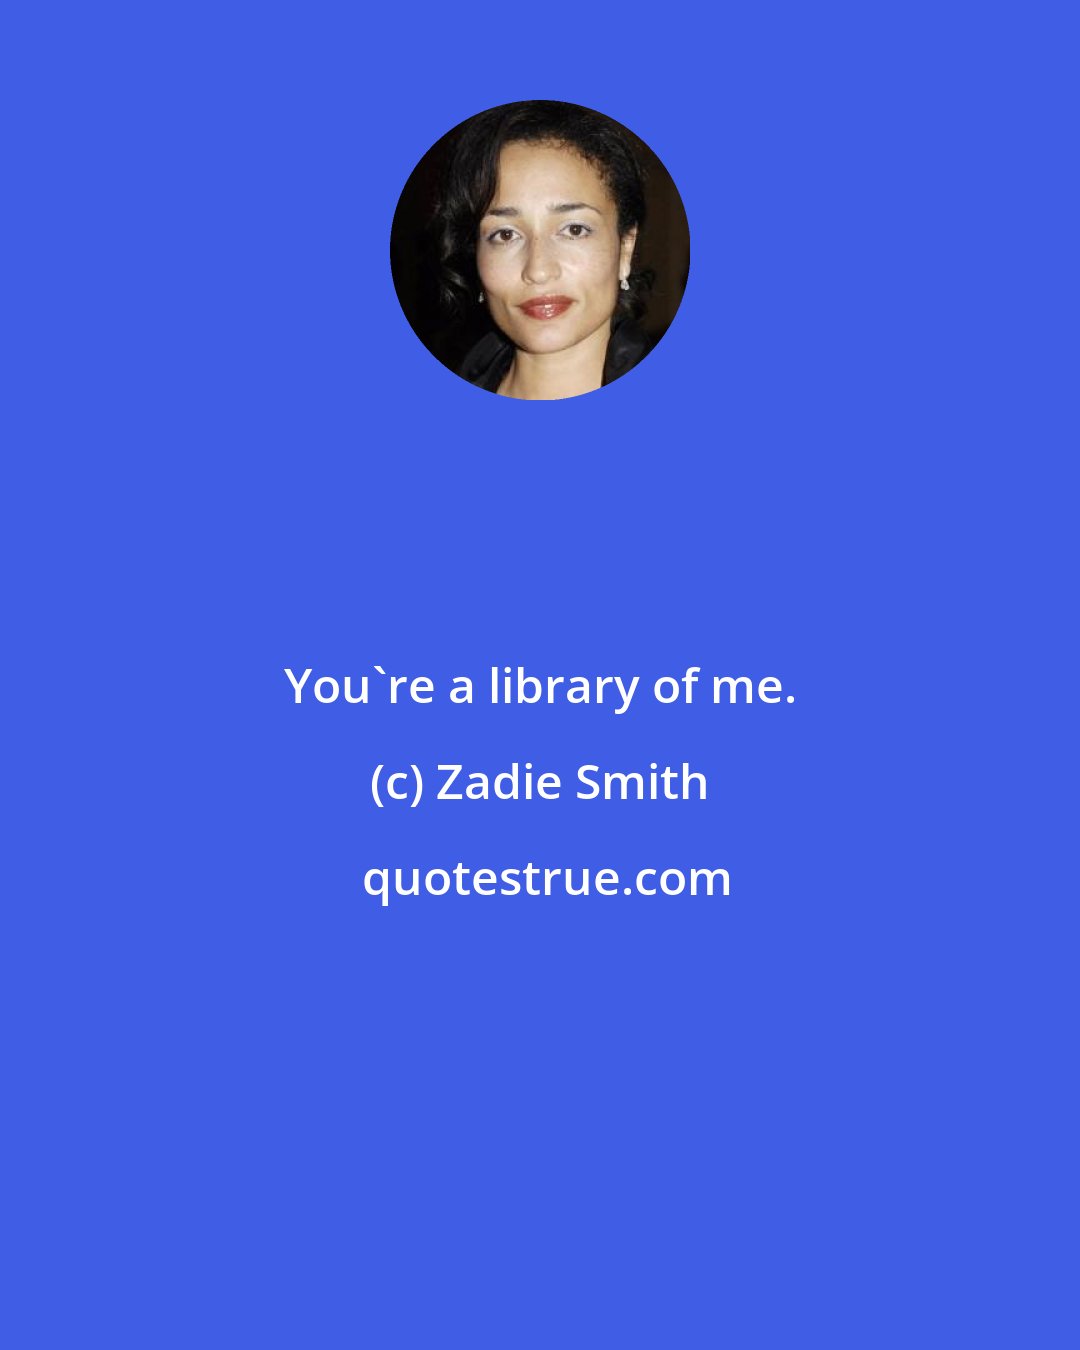 Zadie Smith: You're a library of me.